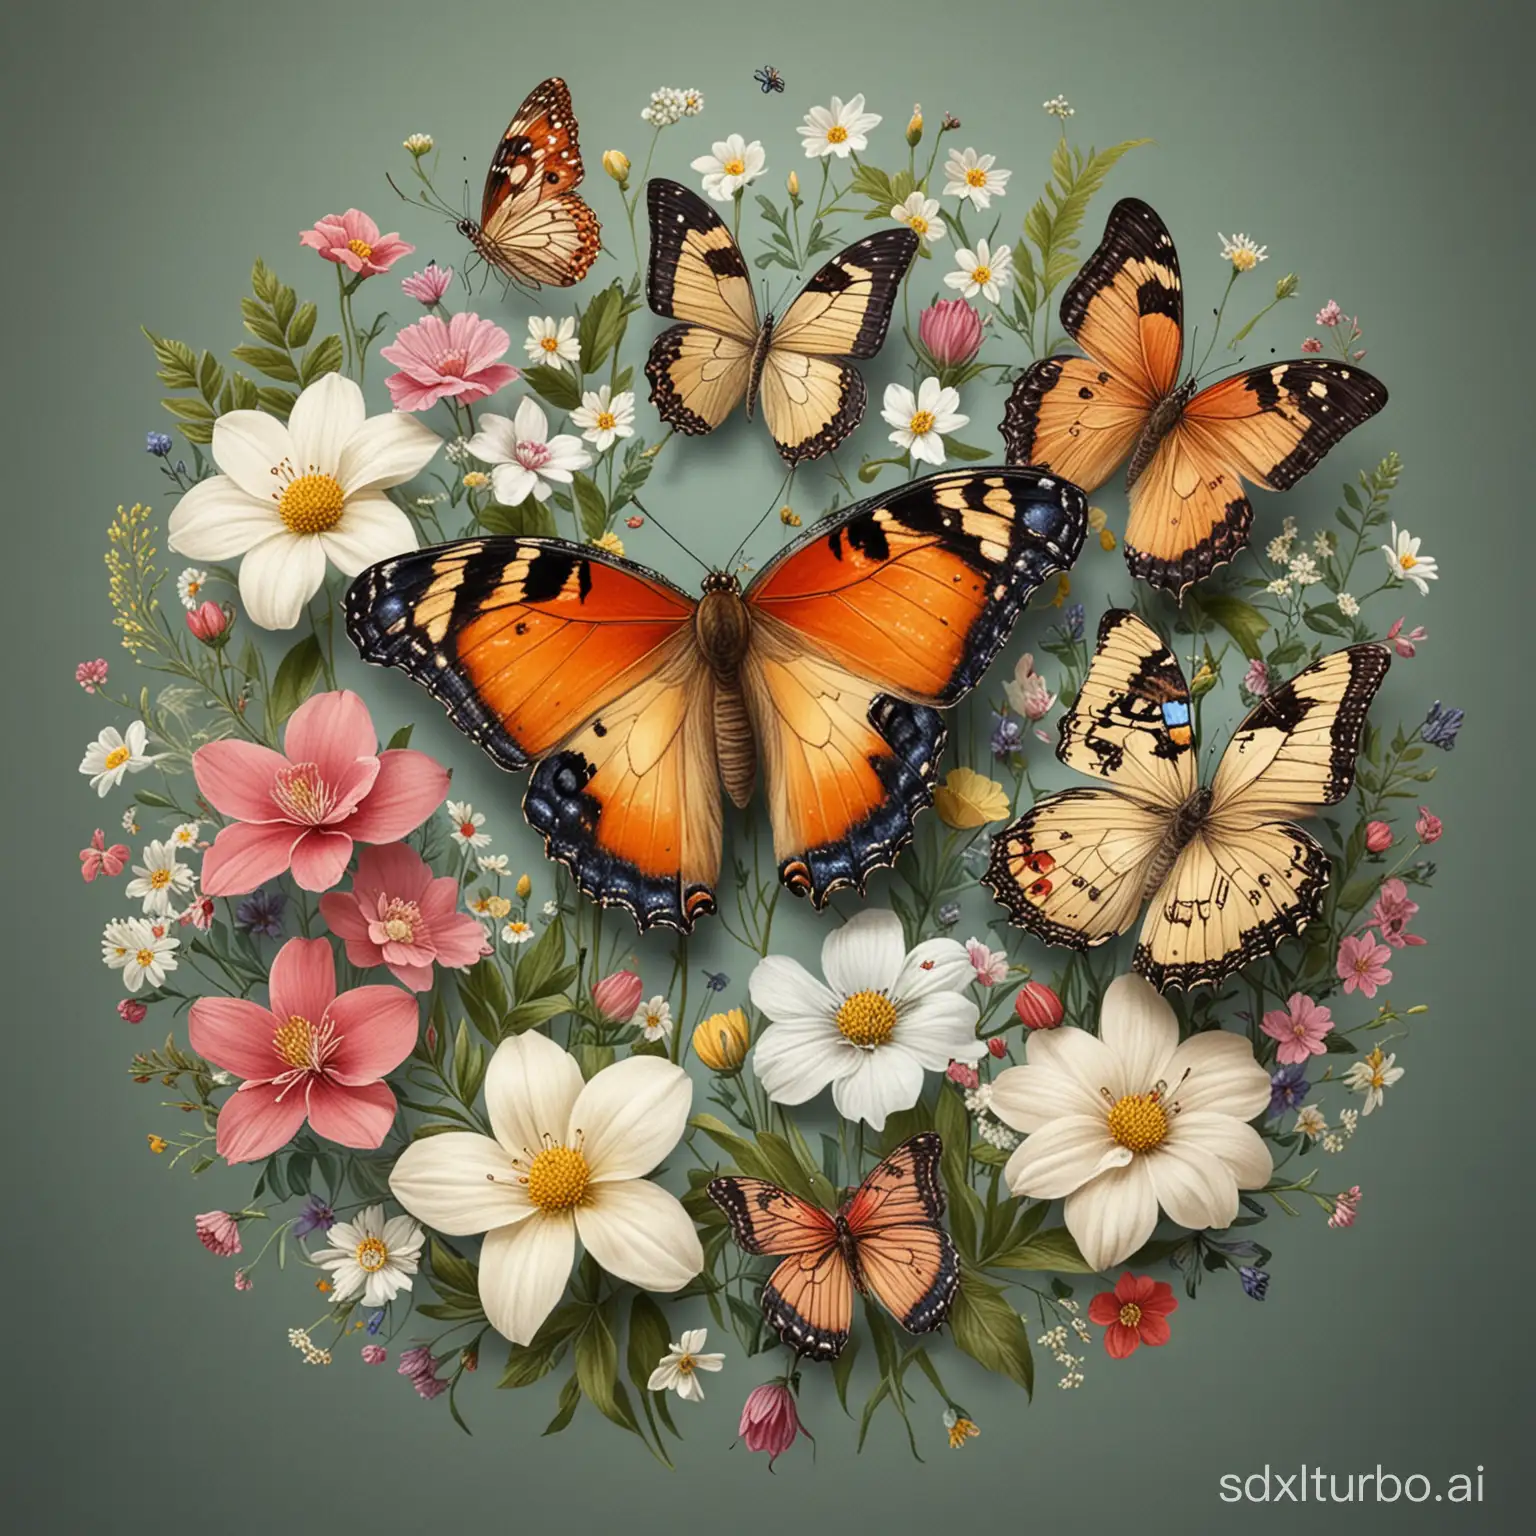 A fresh picture of a small number of butterflies and flowers